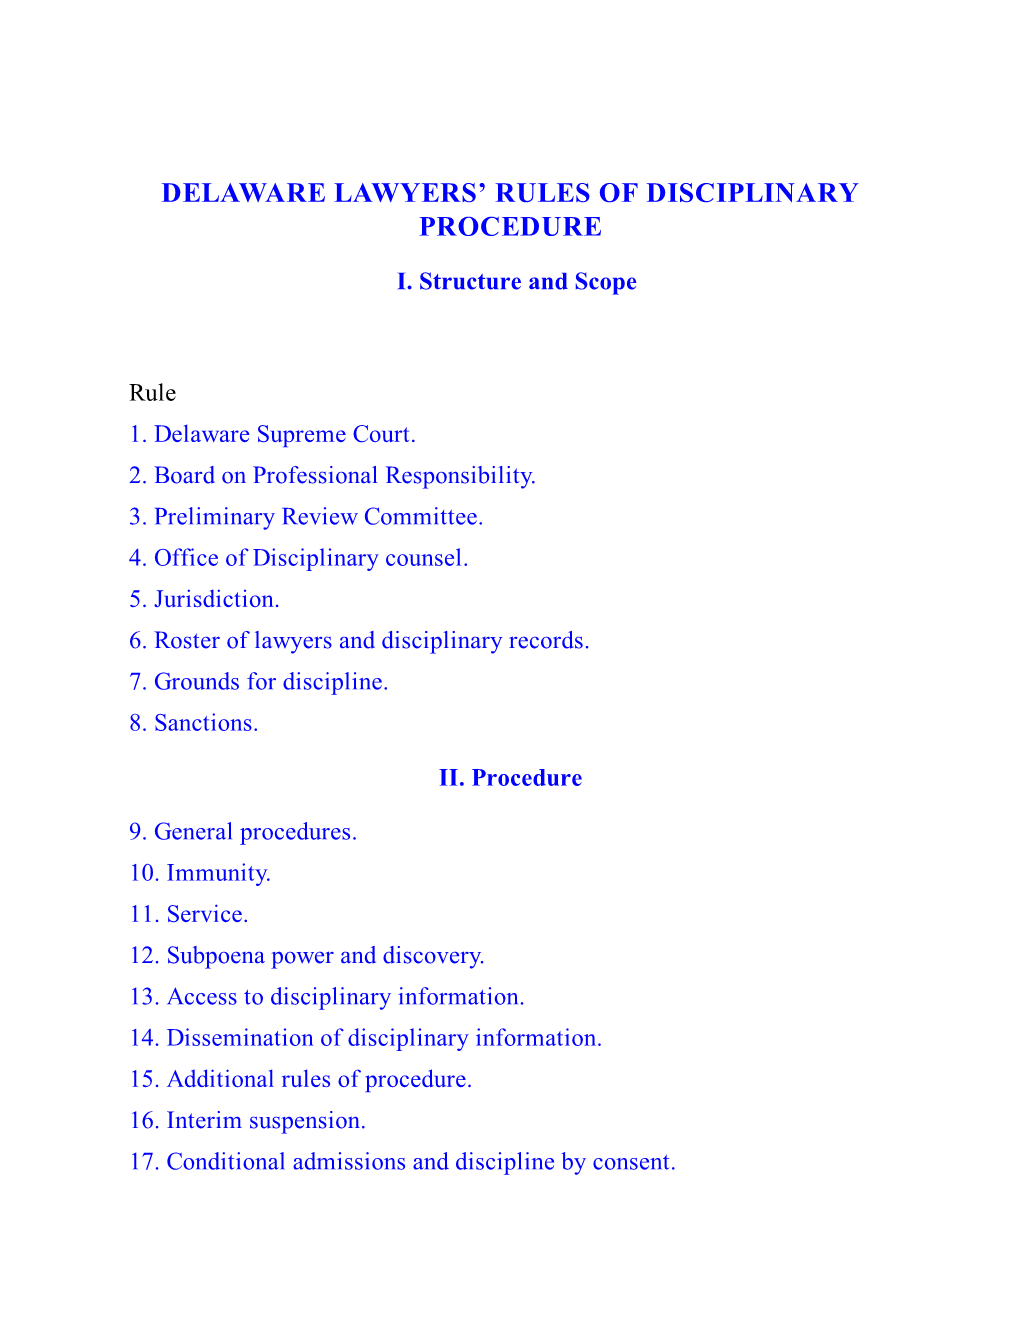 Delaware Lawyers' Rules of Disciplinary Procedure